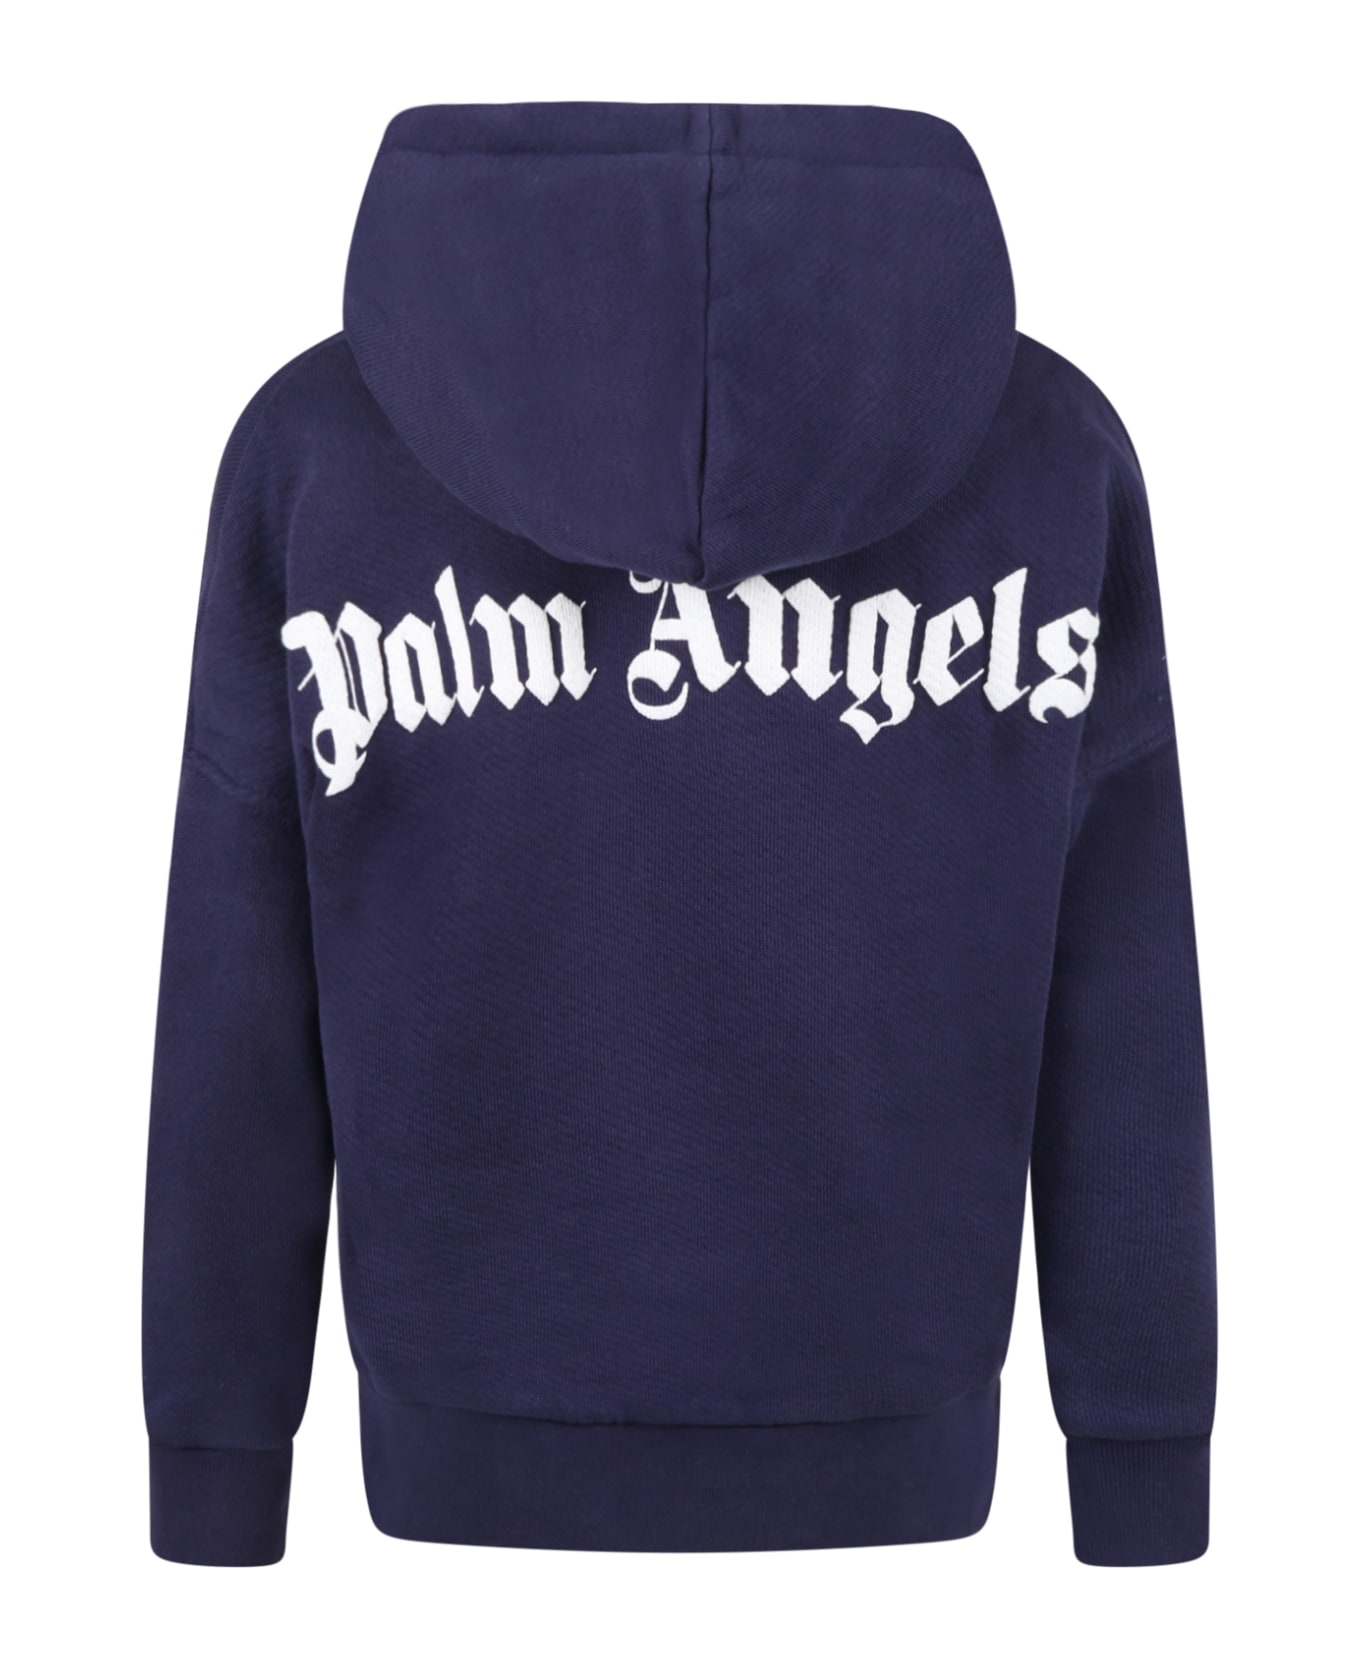 Palm Angels Blue Sweatshirt For Kids With Logo - BLUE